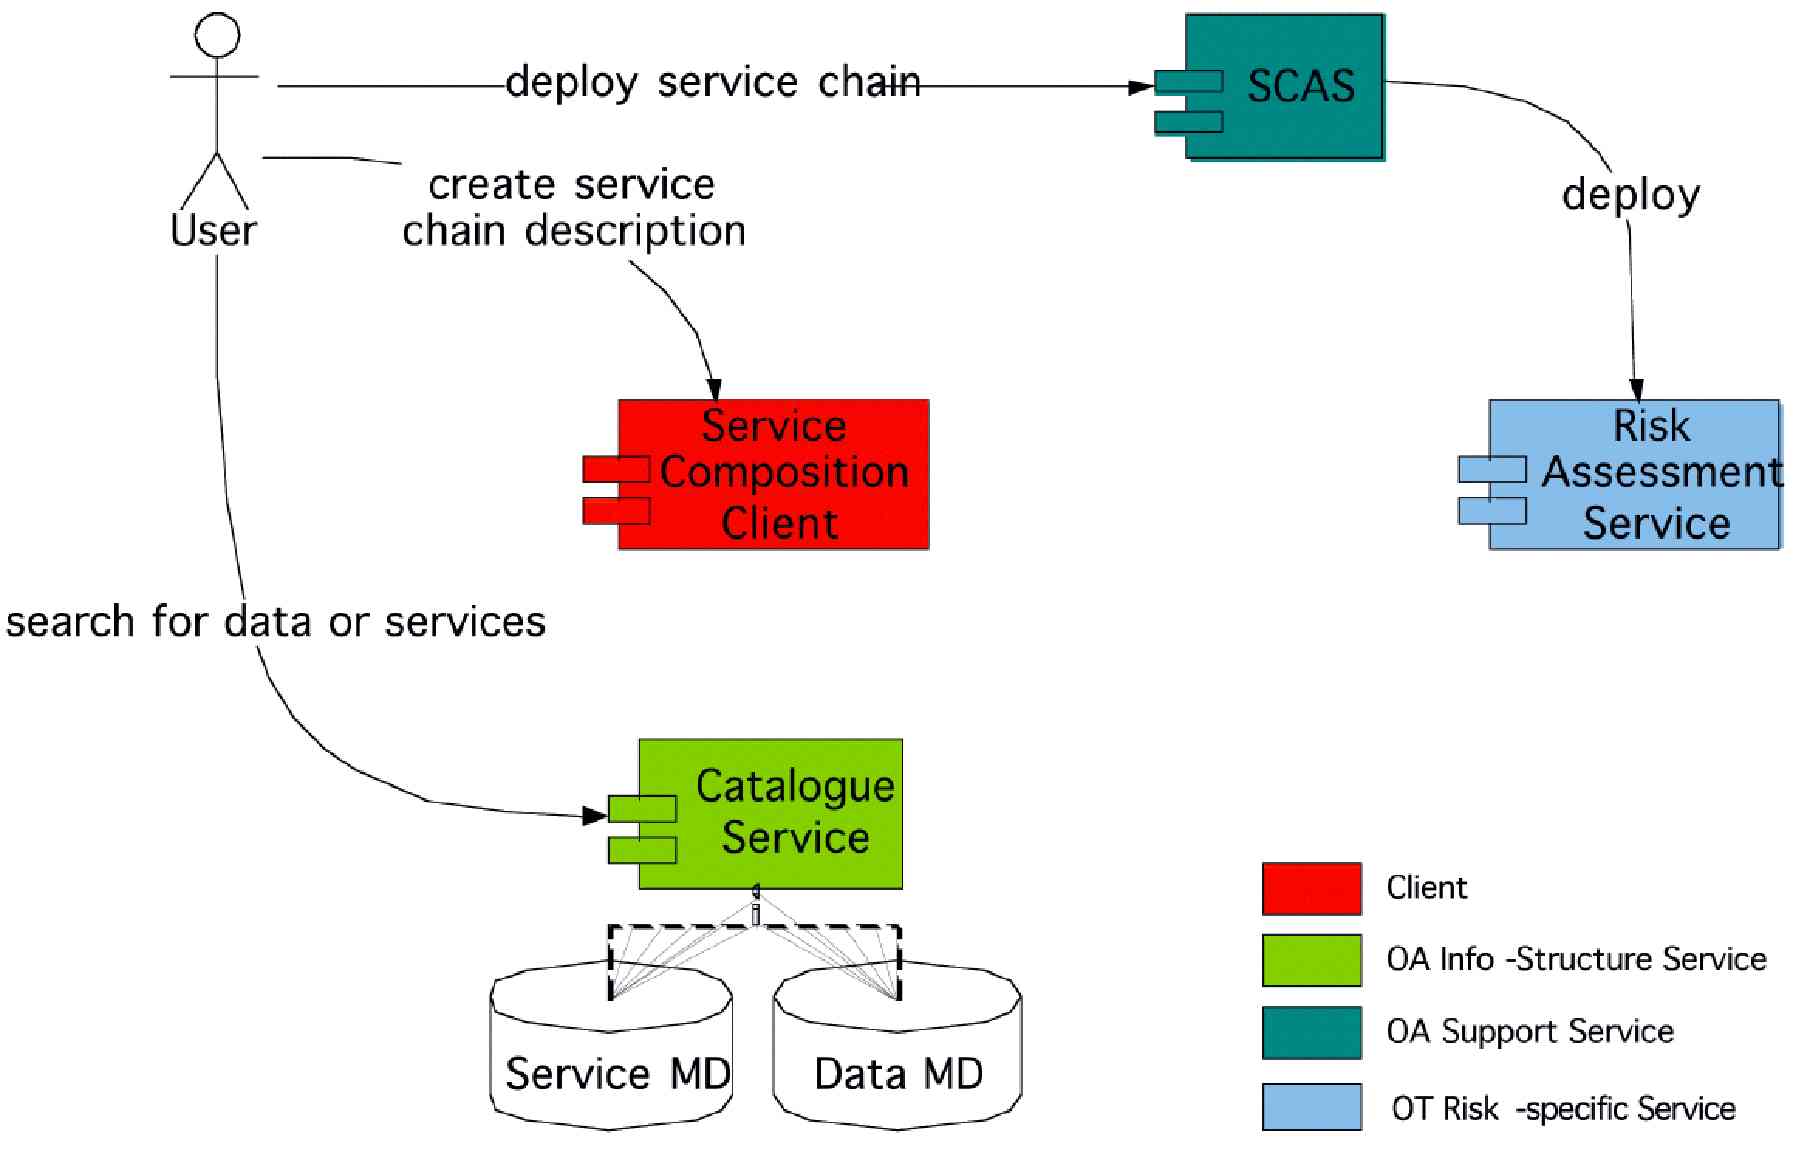 Figure 2. In one ORCHESTRA scenario, a user first finds data and services by means of a Catalog Service containing metadata about available data and services, then creates a service chain and deploys it to a Service Chain Access Service (SCAS), which deploys the service chain as multi-component Risk Assessment Service. (Figure from the ORCHESTRA project.)